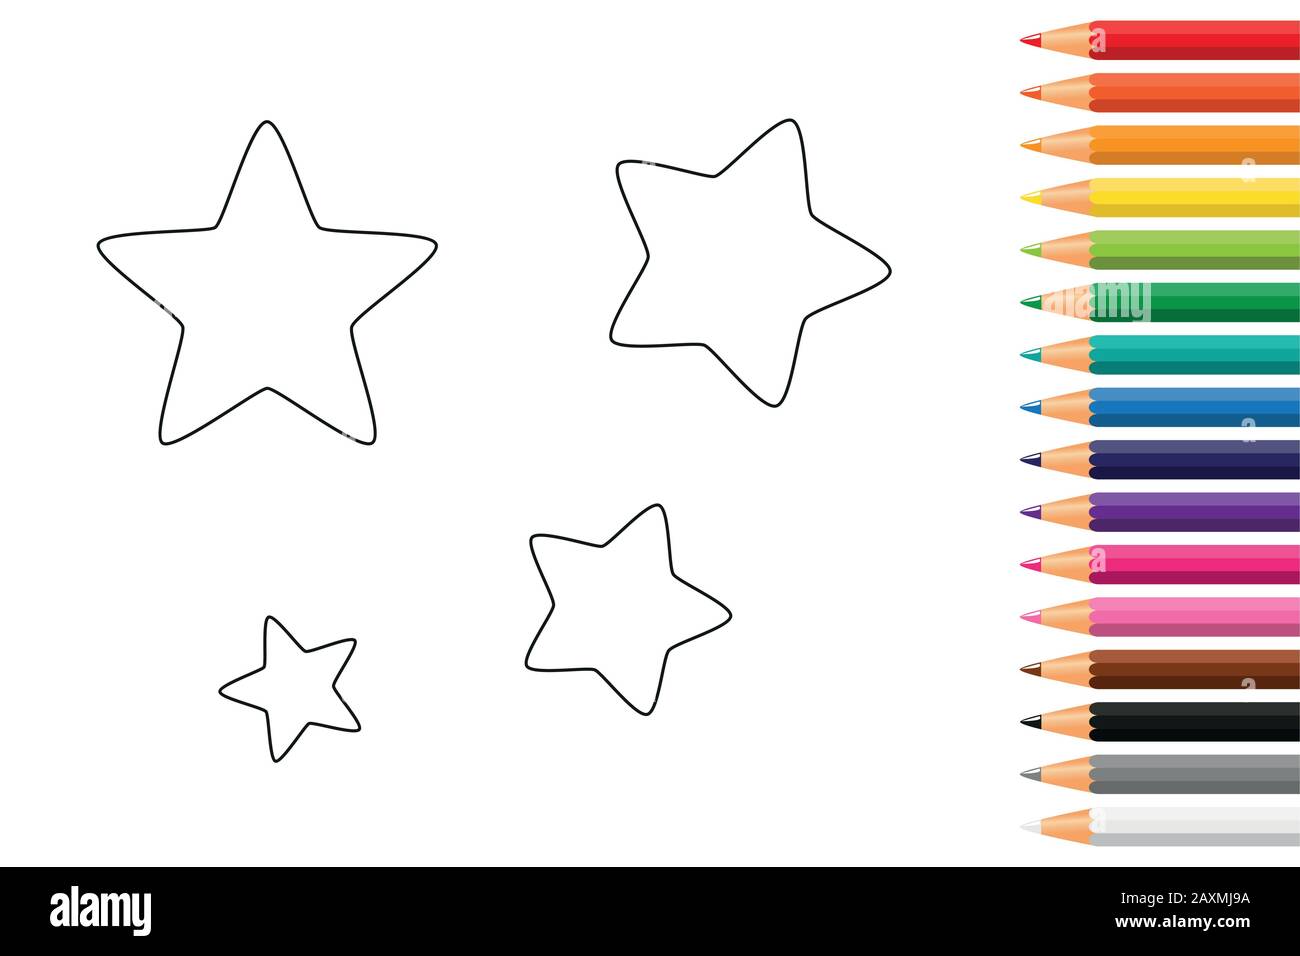 Pencil Colors Collection stock vector. Illustration of pencil - 173925798